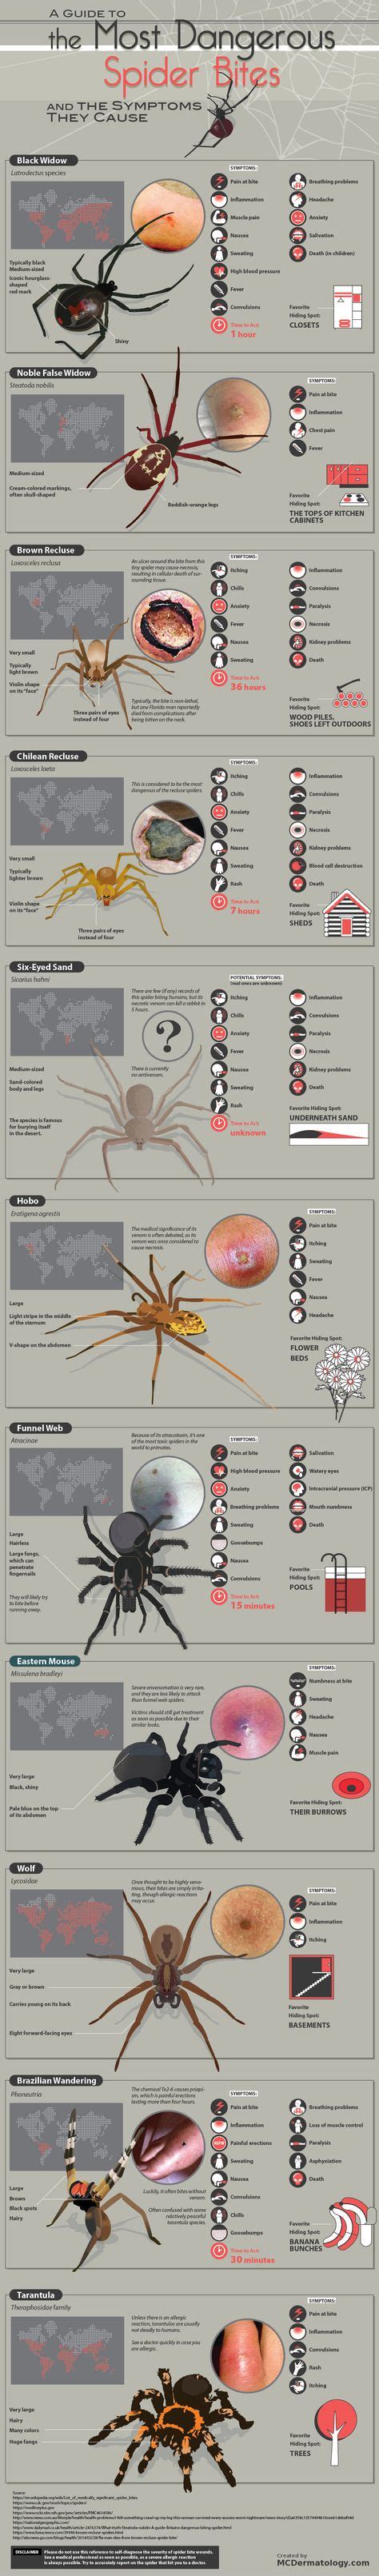 Pin By Reviews Simple On Infographic Spider Bites Spider Bite